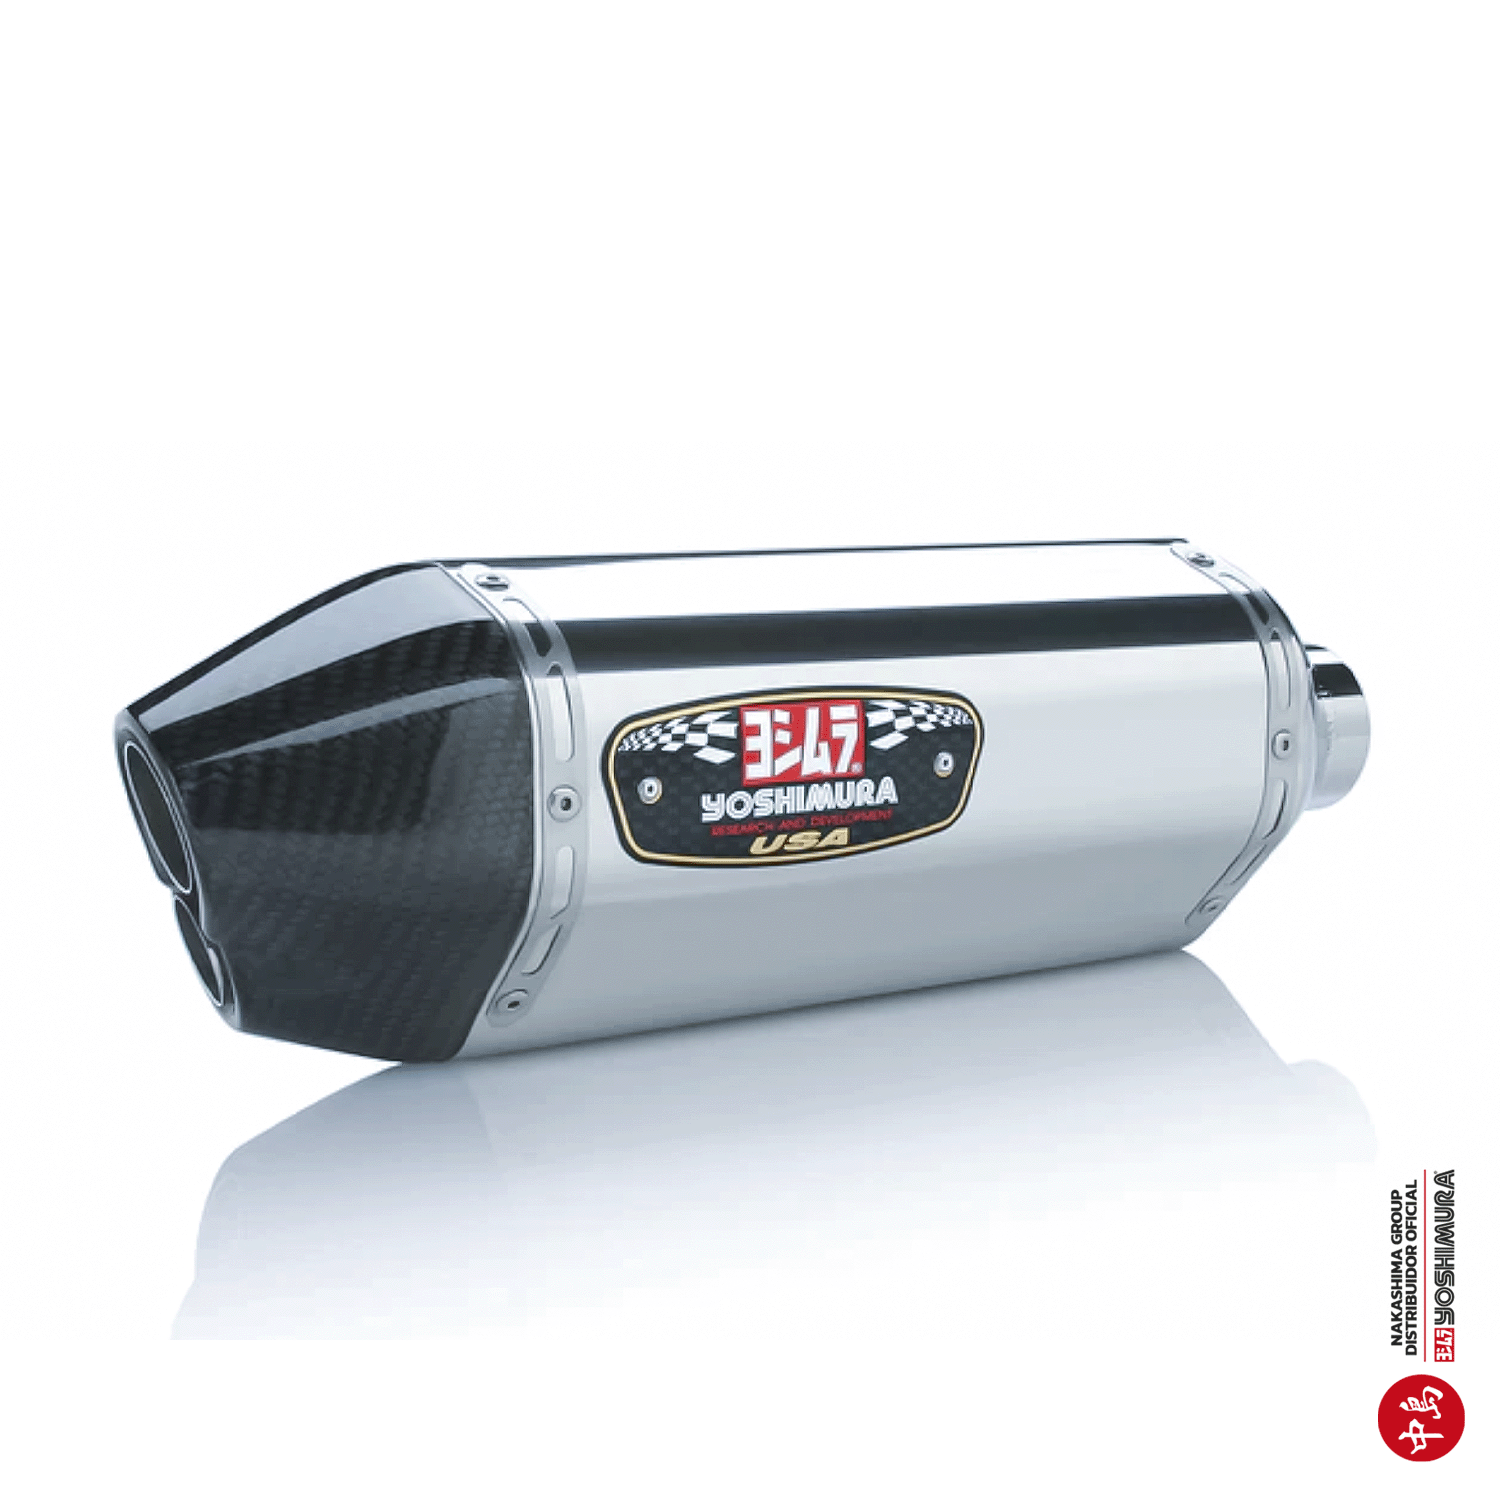 GSX-R600/750 11-22 R-77D Stainless Slip-On Exhaust, w/ Stainless Muffler